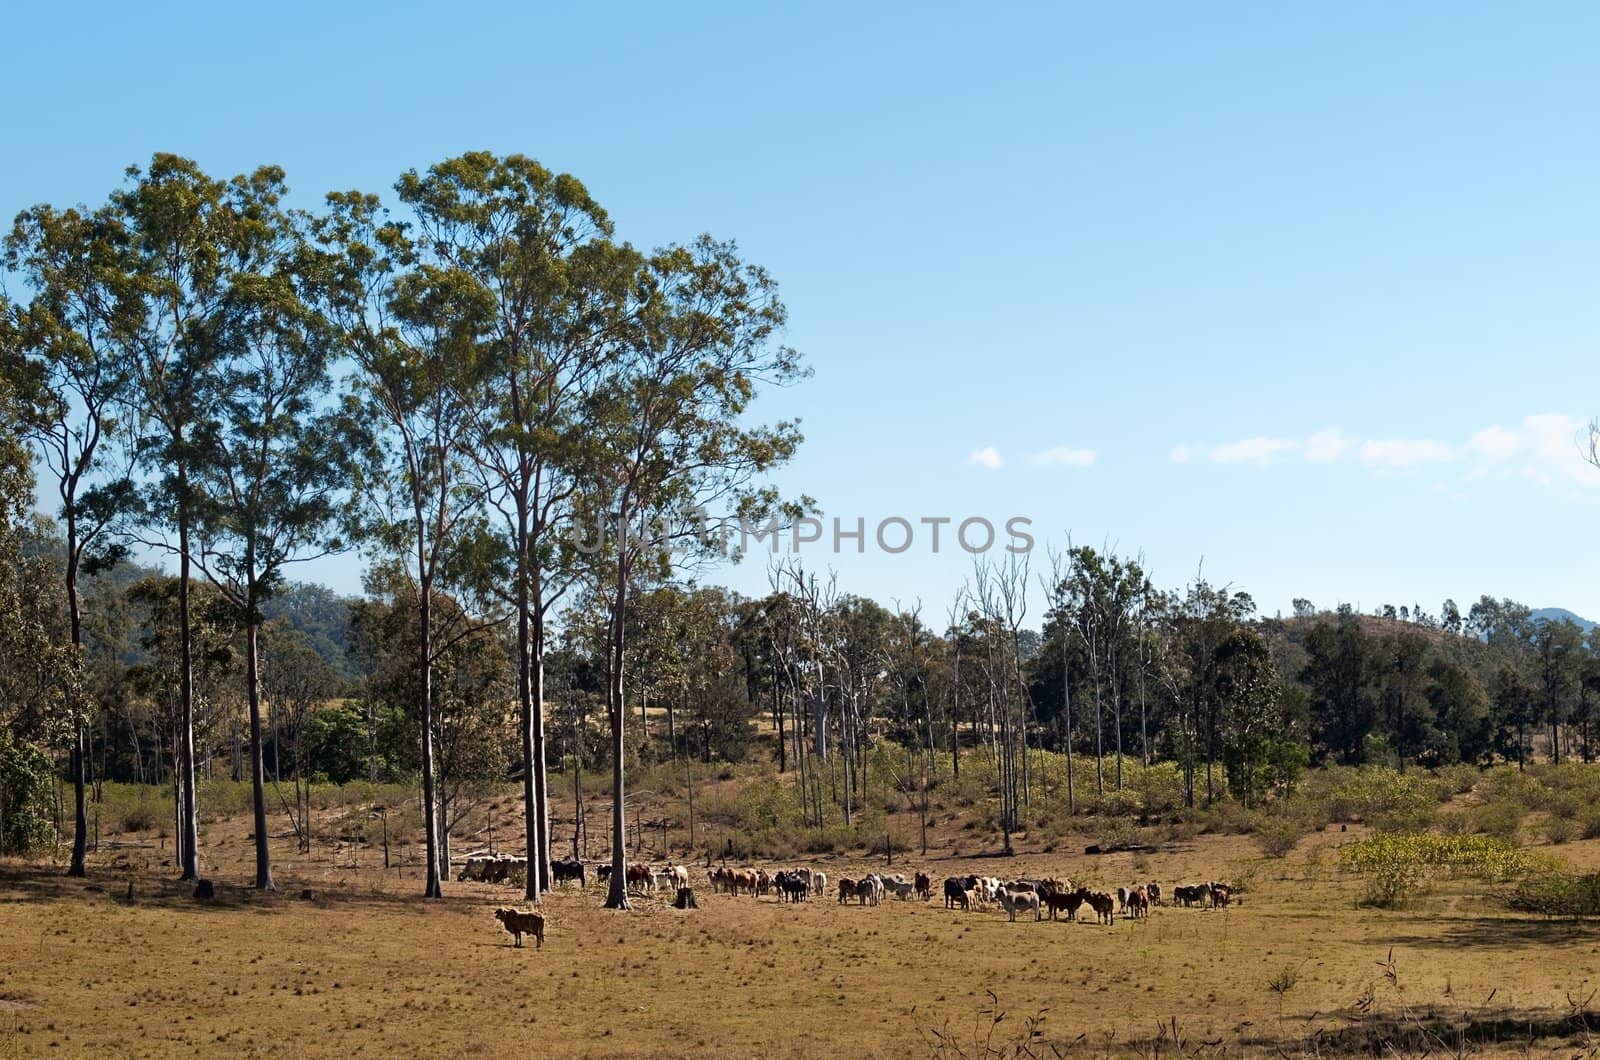 Australian country landscape scene cattle herd with gum trees and blue sky